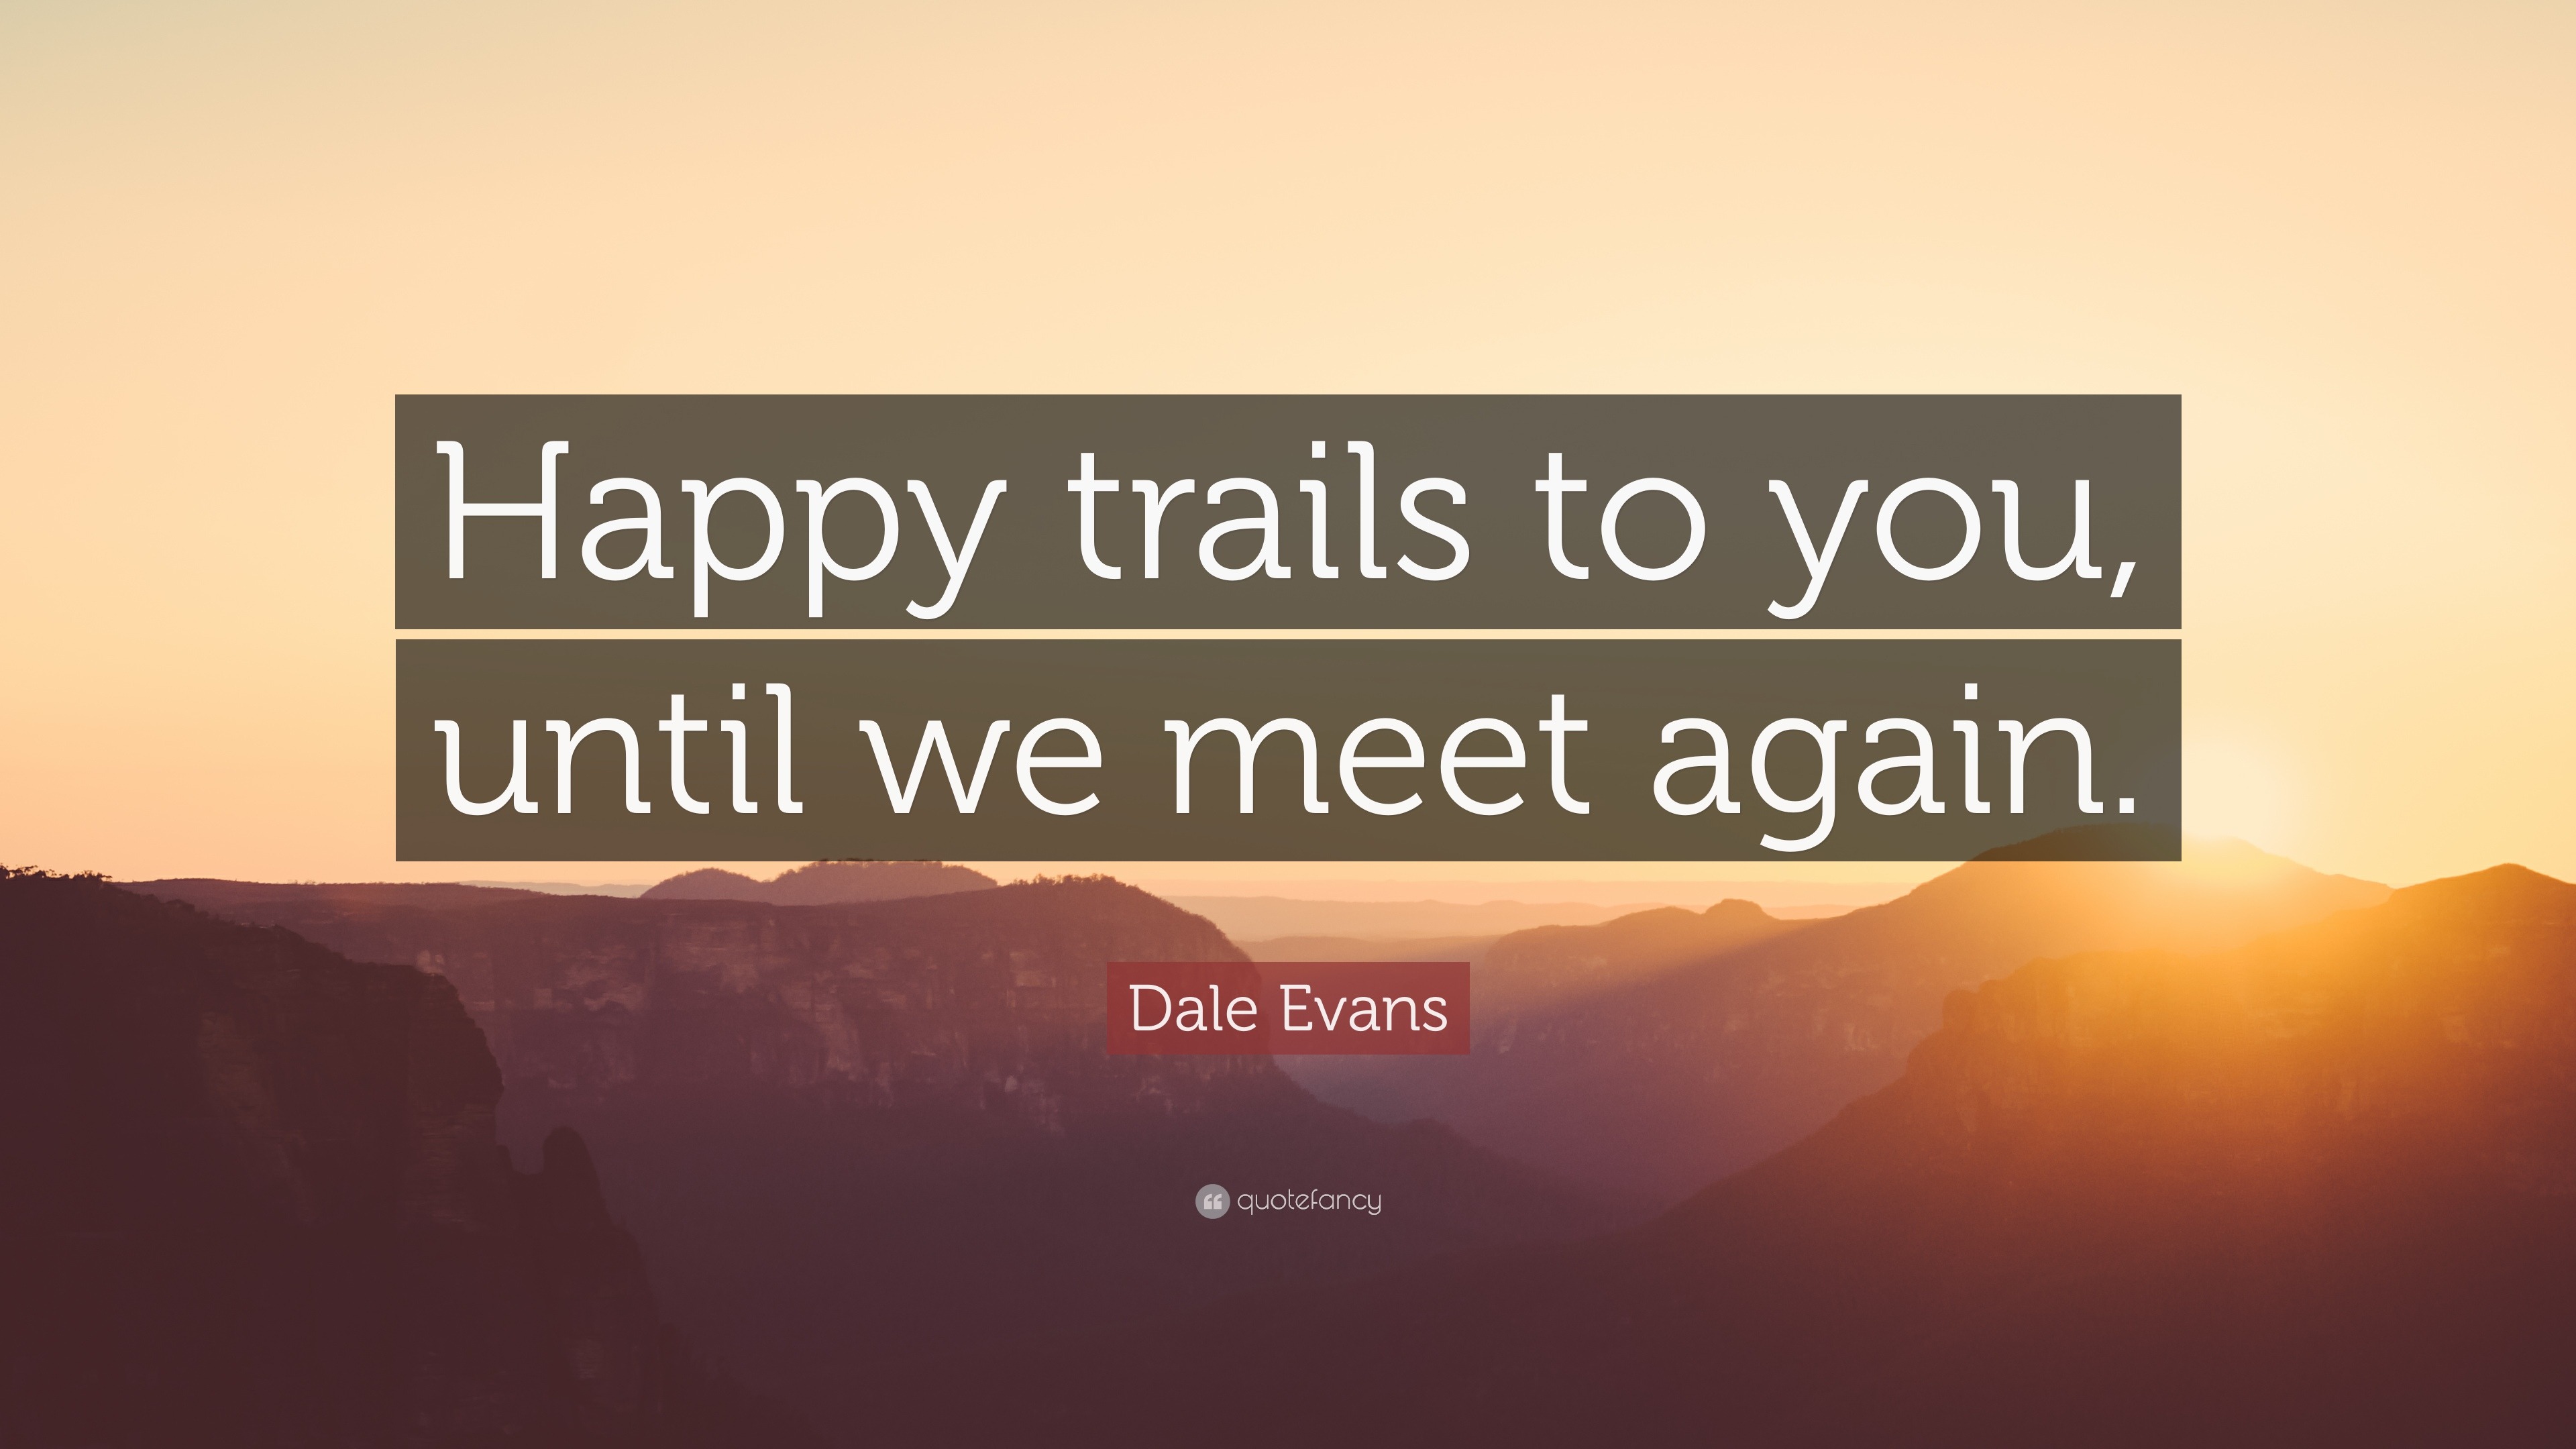 Dale Evans Quote: “Happy trails to you, until we meet again.”